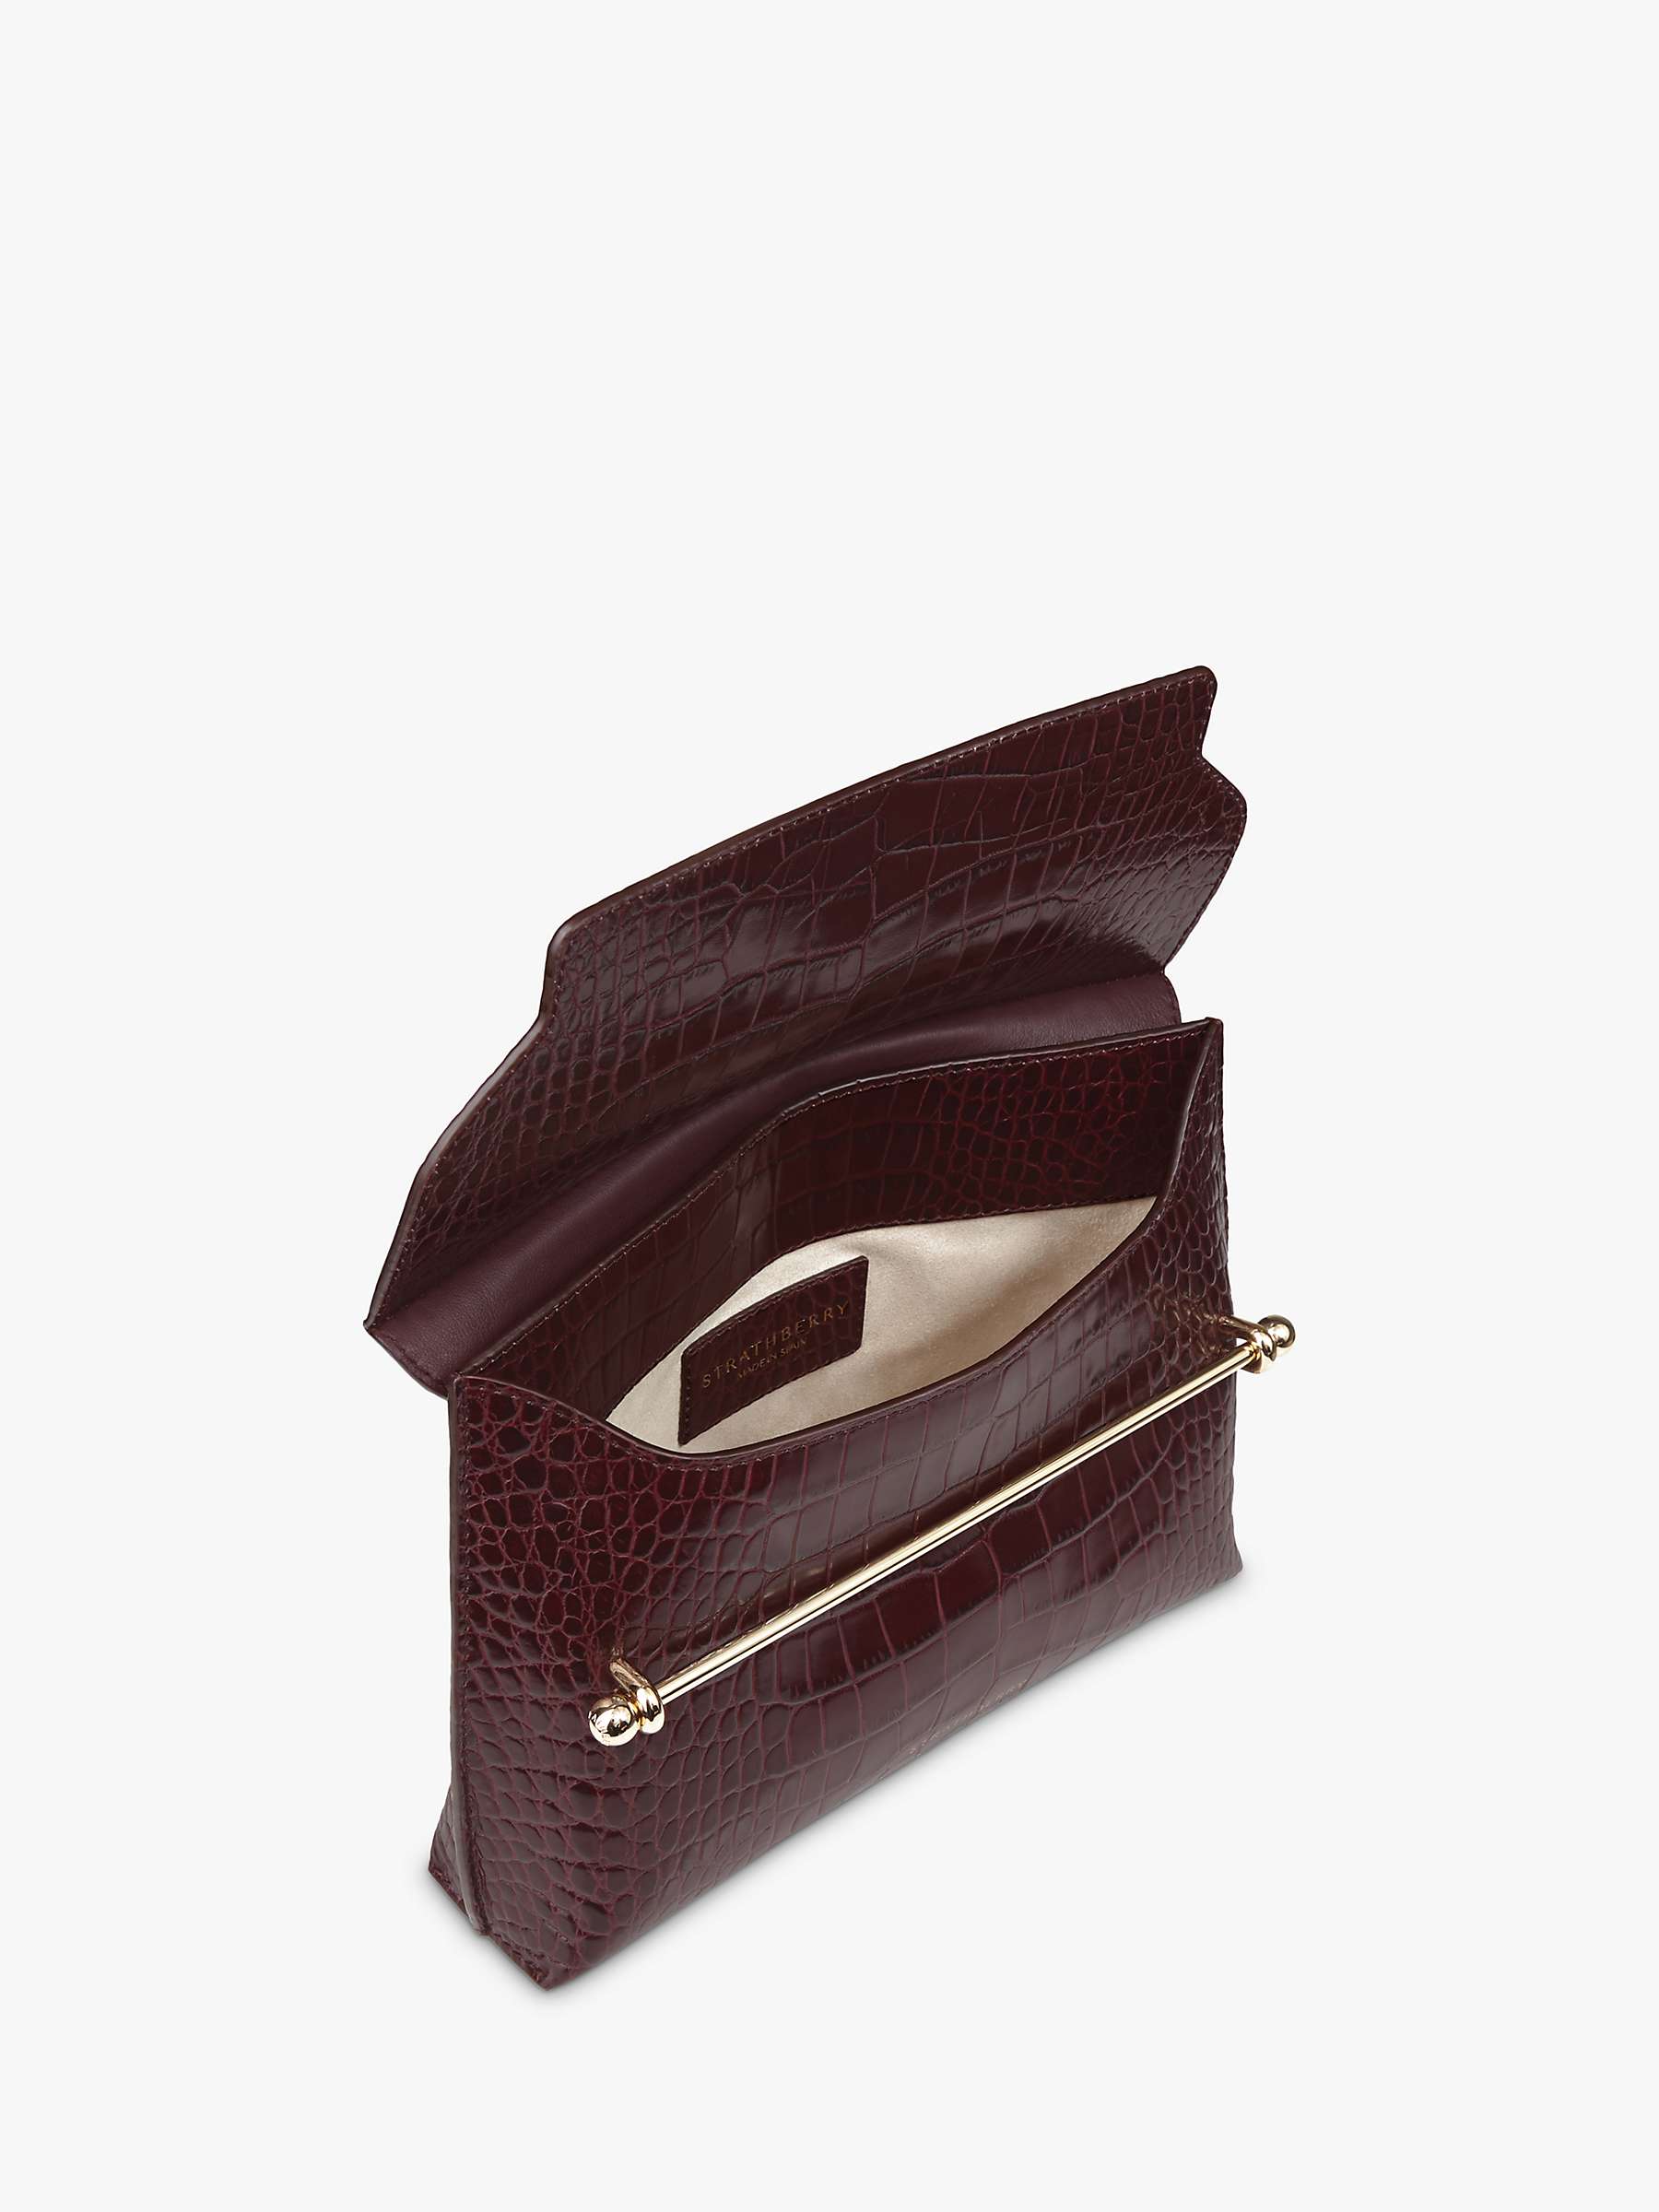 Buy Strathberry Stylist Leather Clutch Bag Online at johnlewis.com